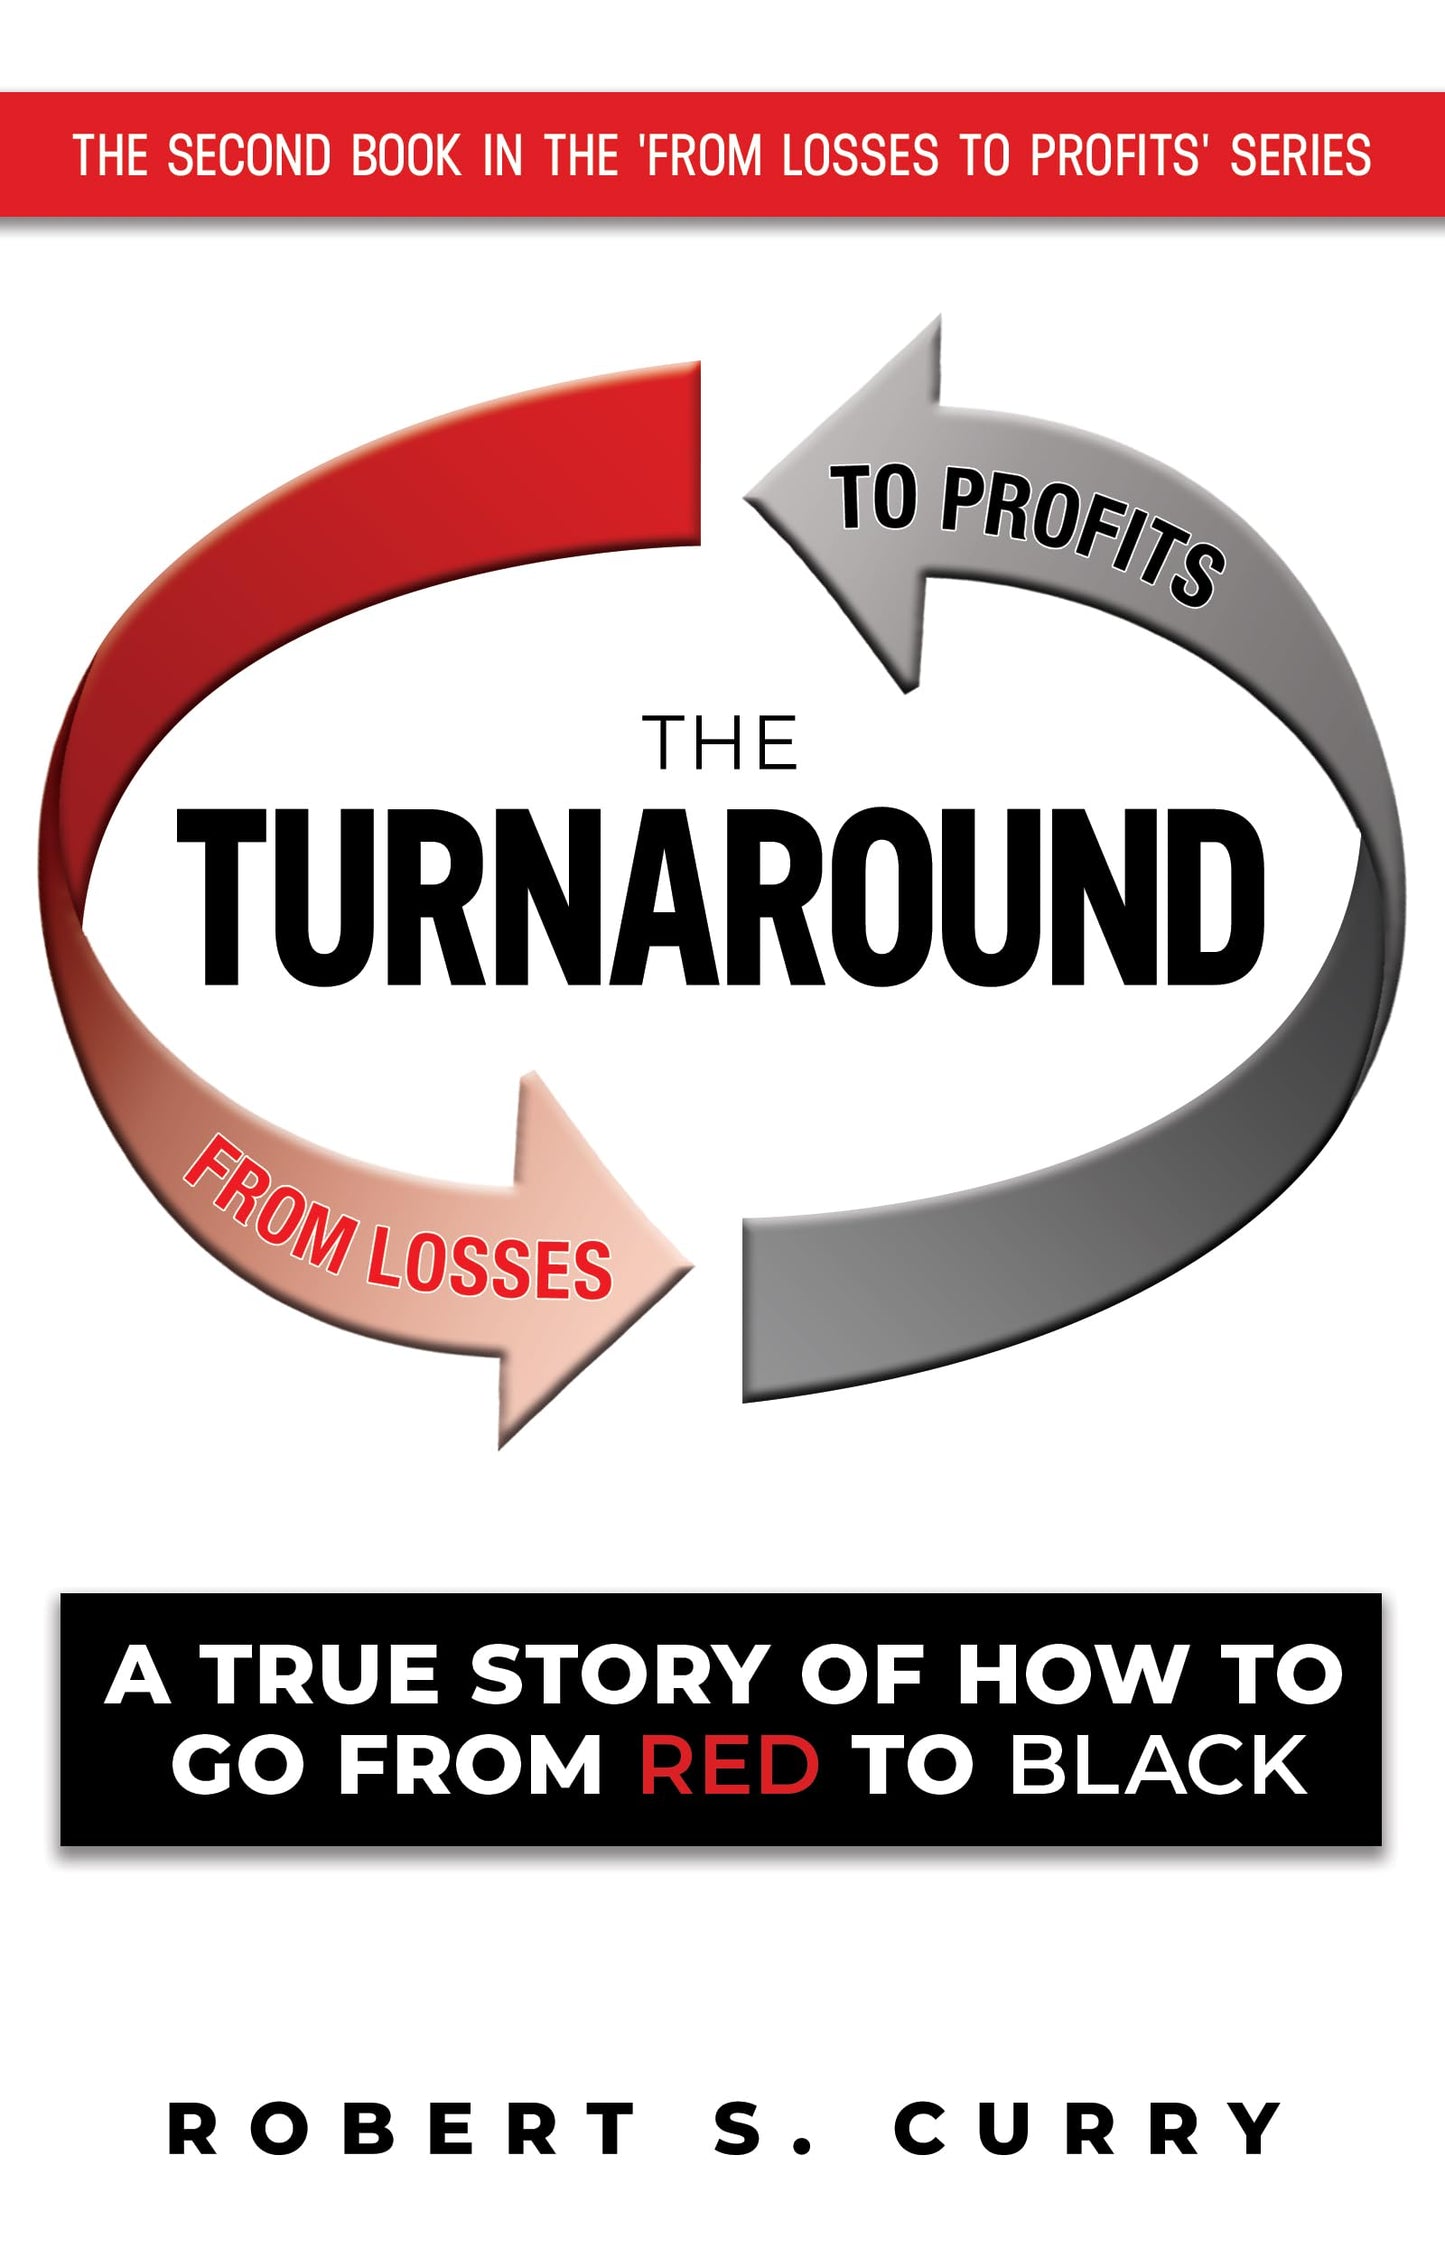 The Turnaround: A True Story of How to Go from Red to Black ($48 Million to $130 Million in Nine Months) (Losses to Profits Series)